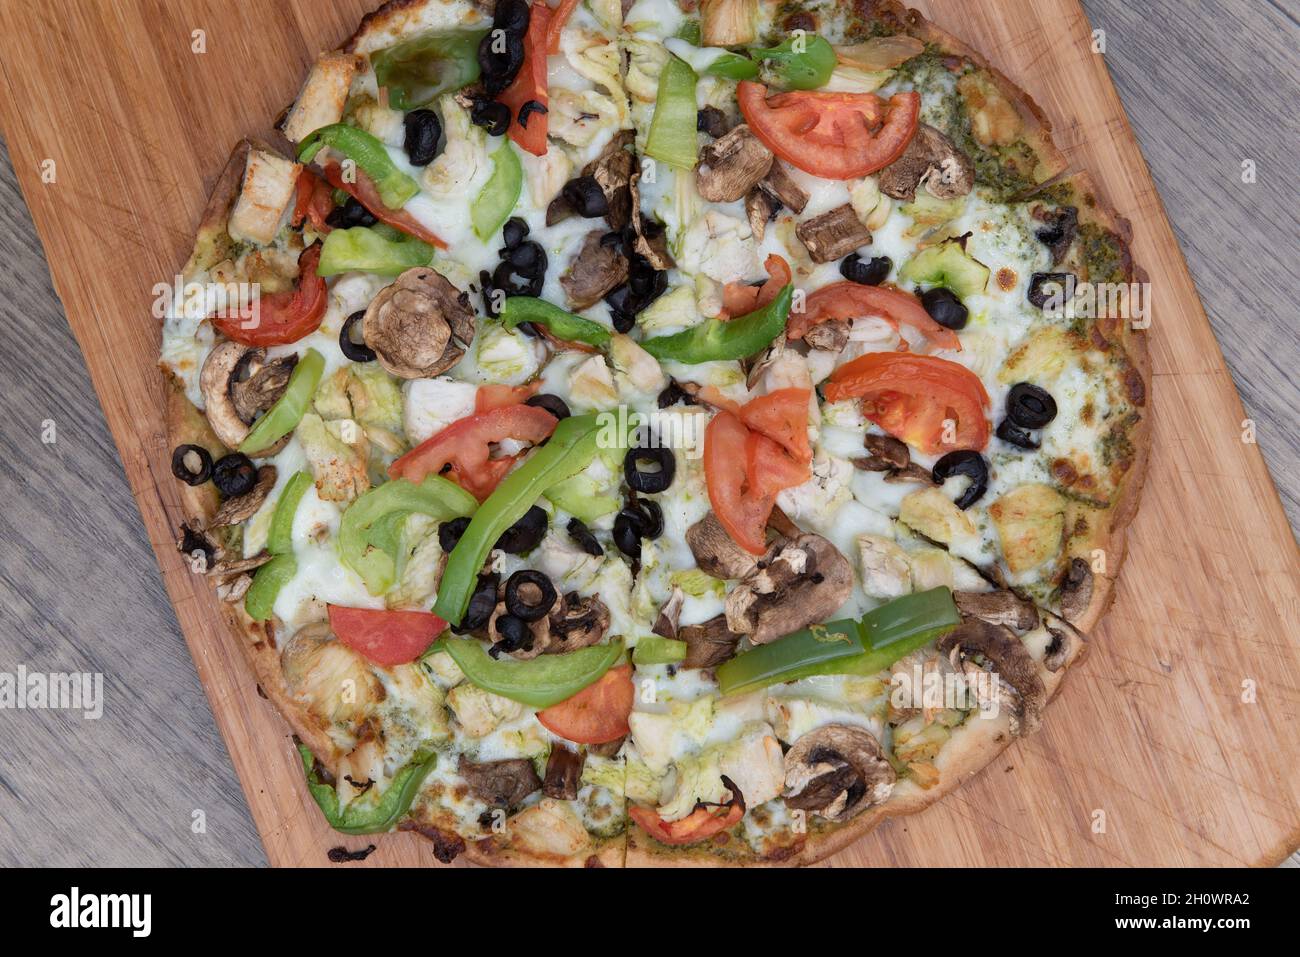 Overhead view of freshly baked cauliflower crust pizza with chopped vegetable toppings served on a wooden platter. Stock Photo